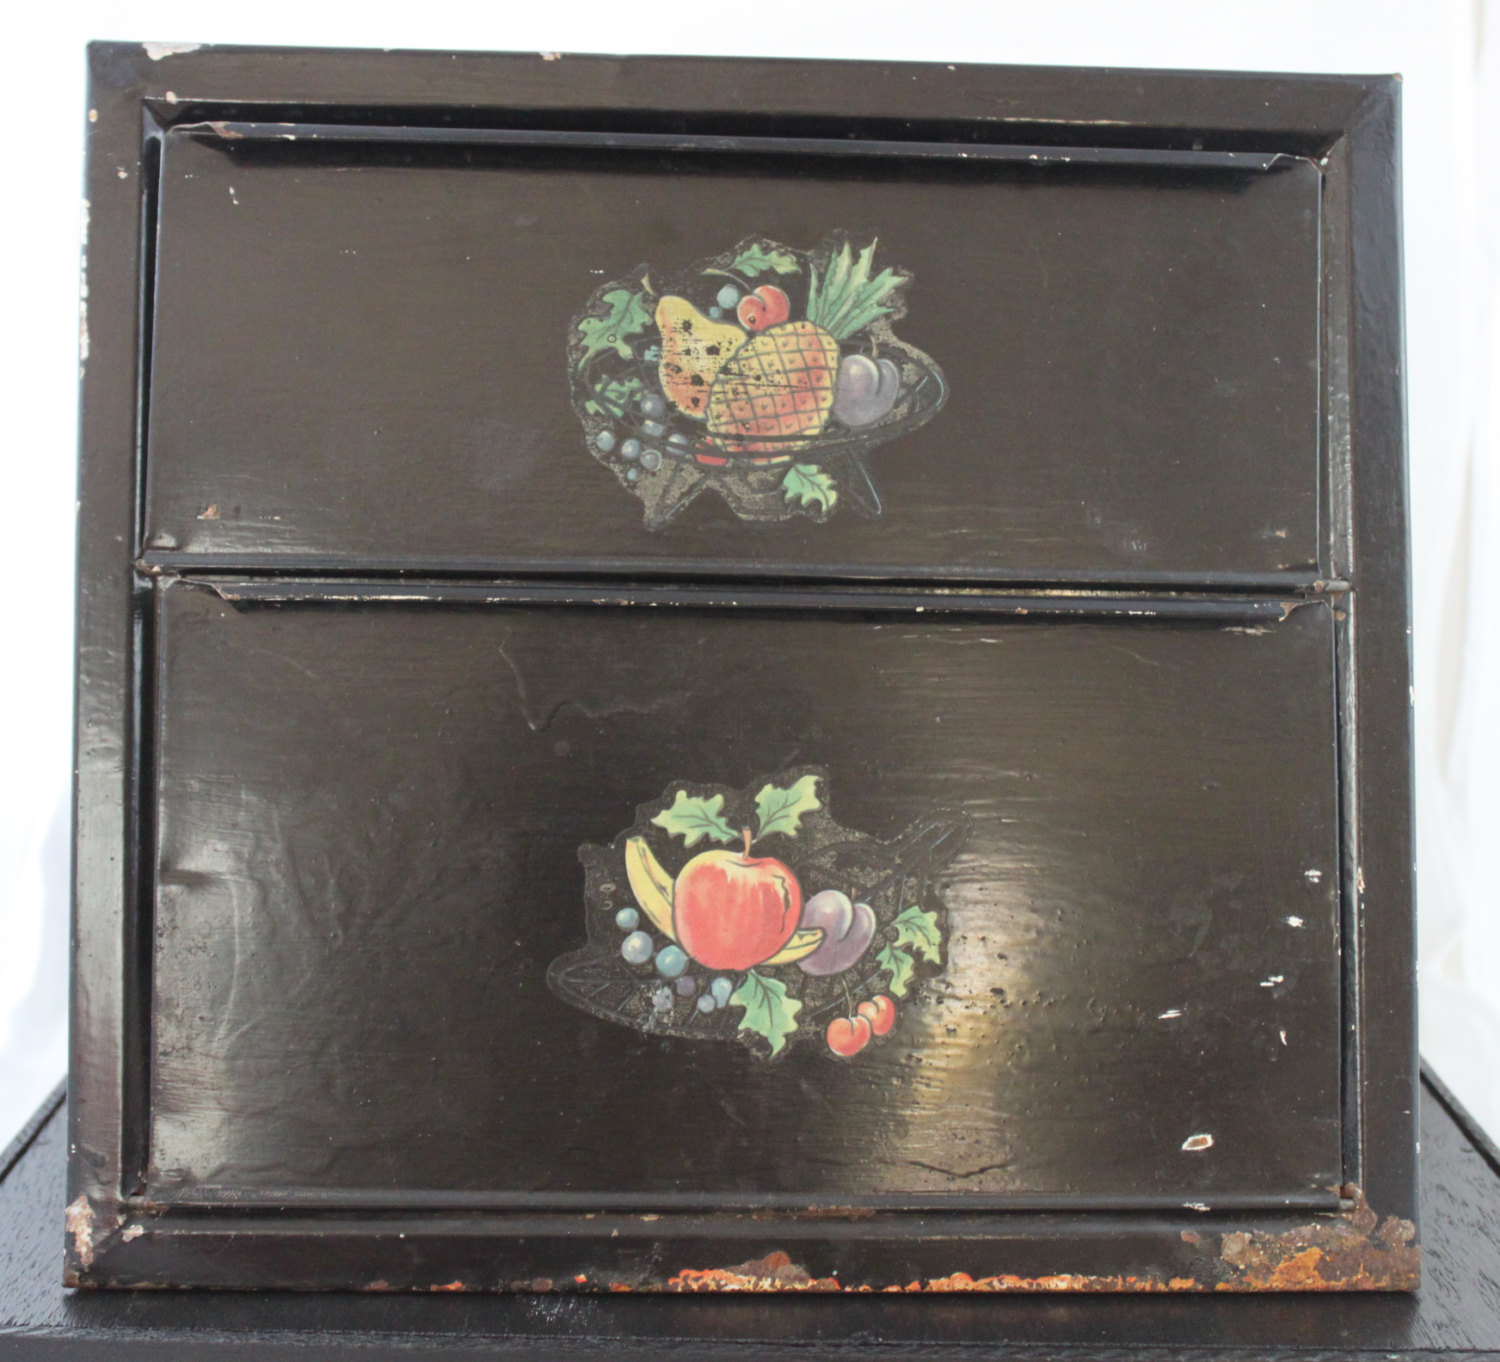 Vintage Metal Tin Black Decorative Fruit Bread Box and Pie Safe from ...